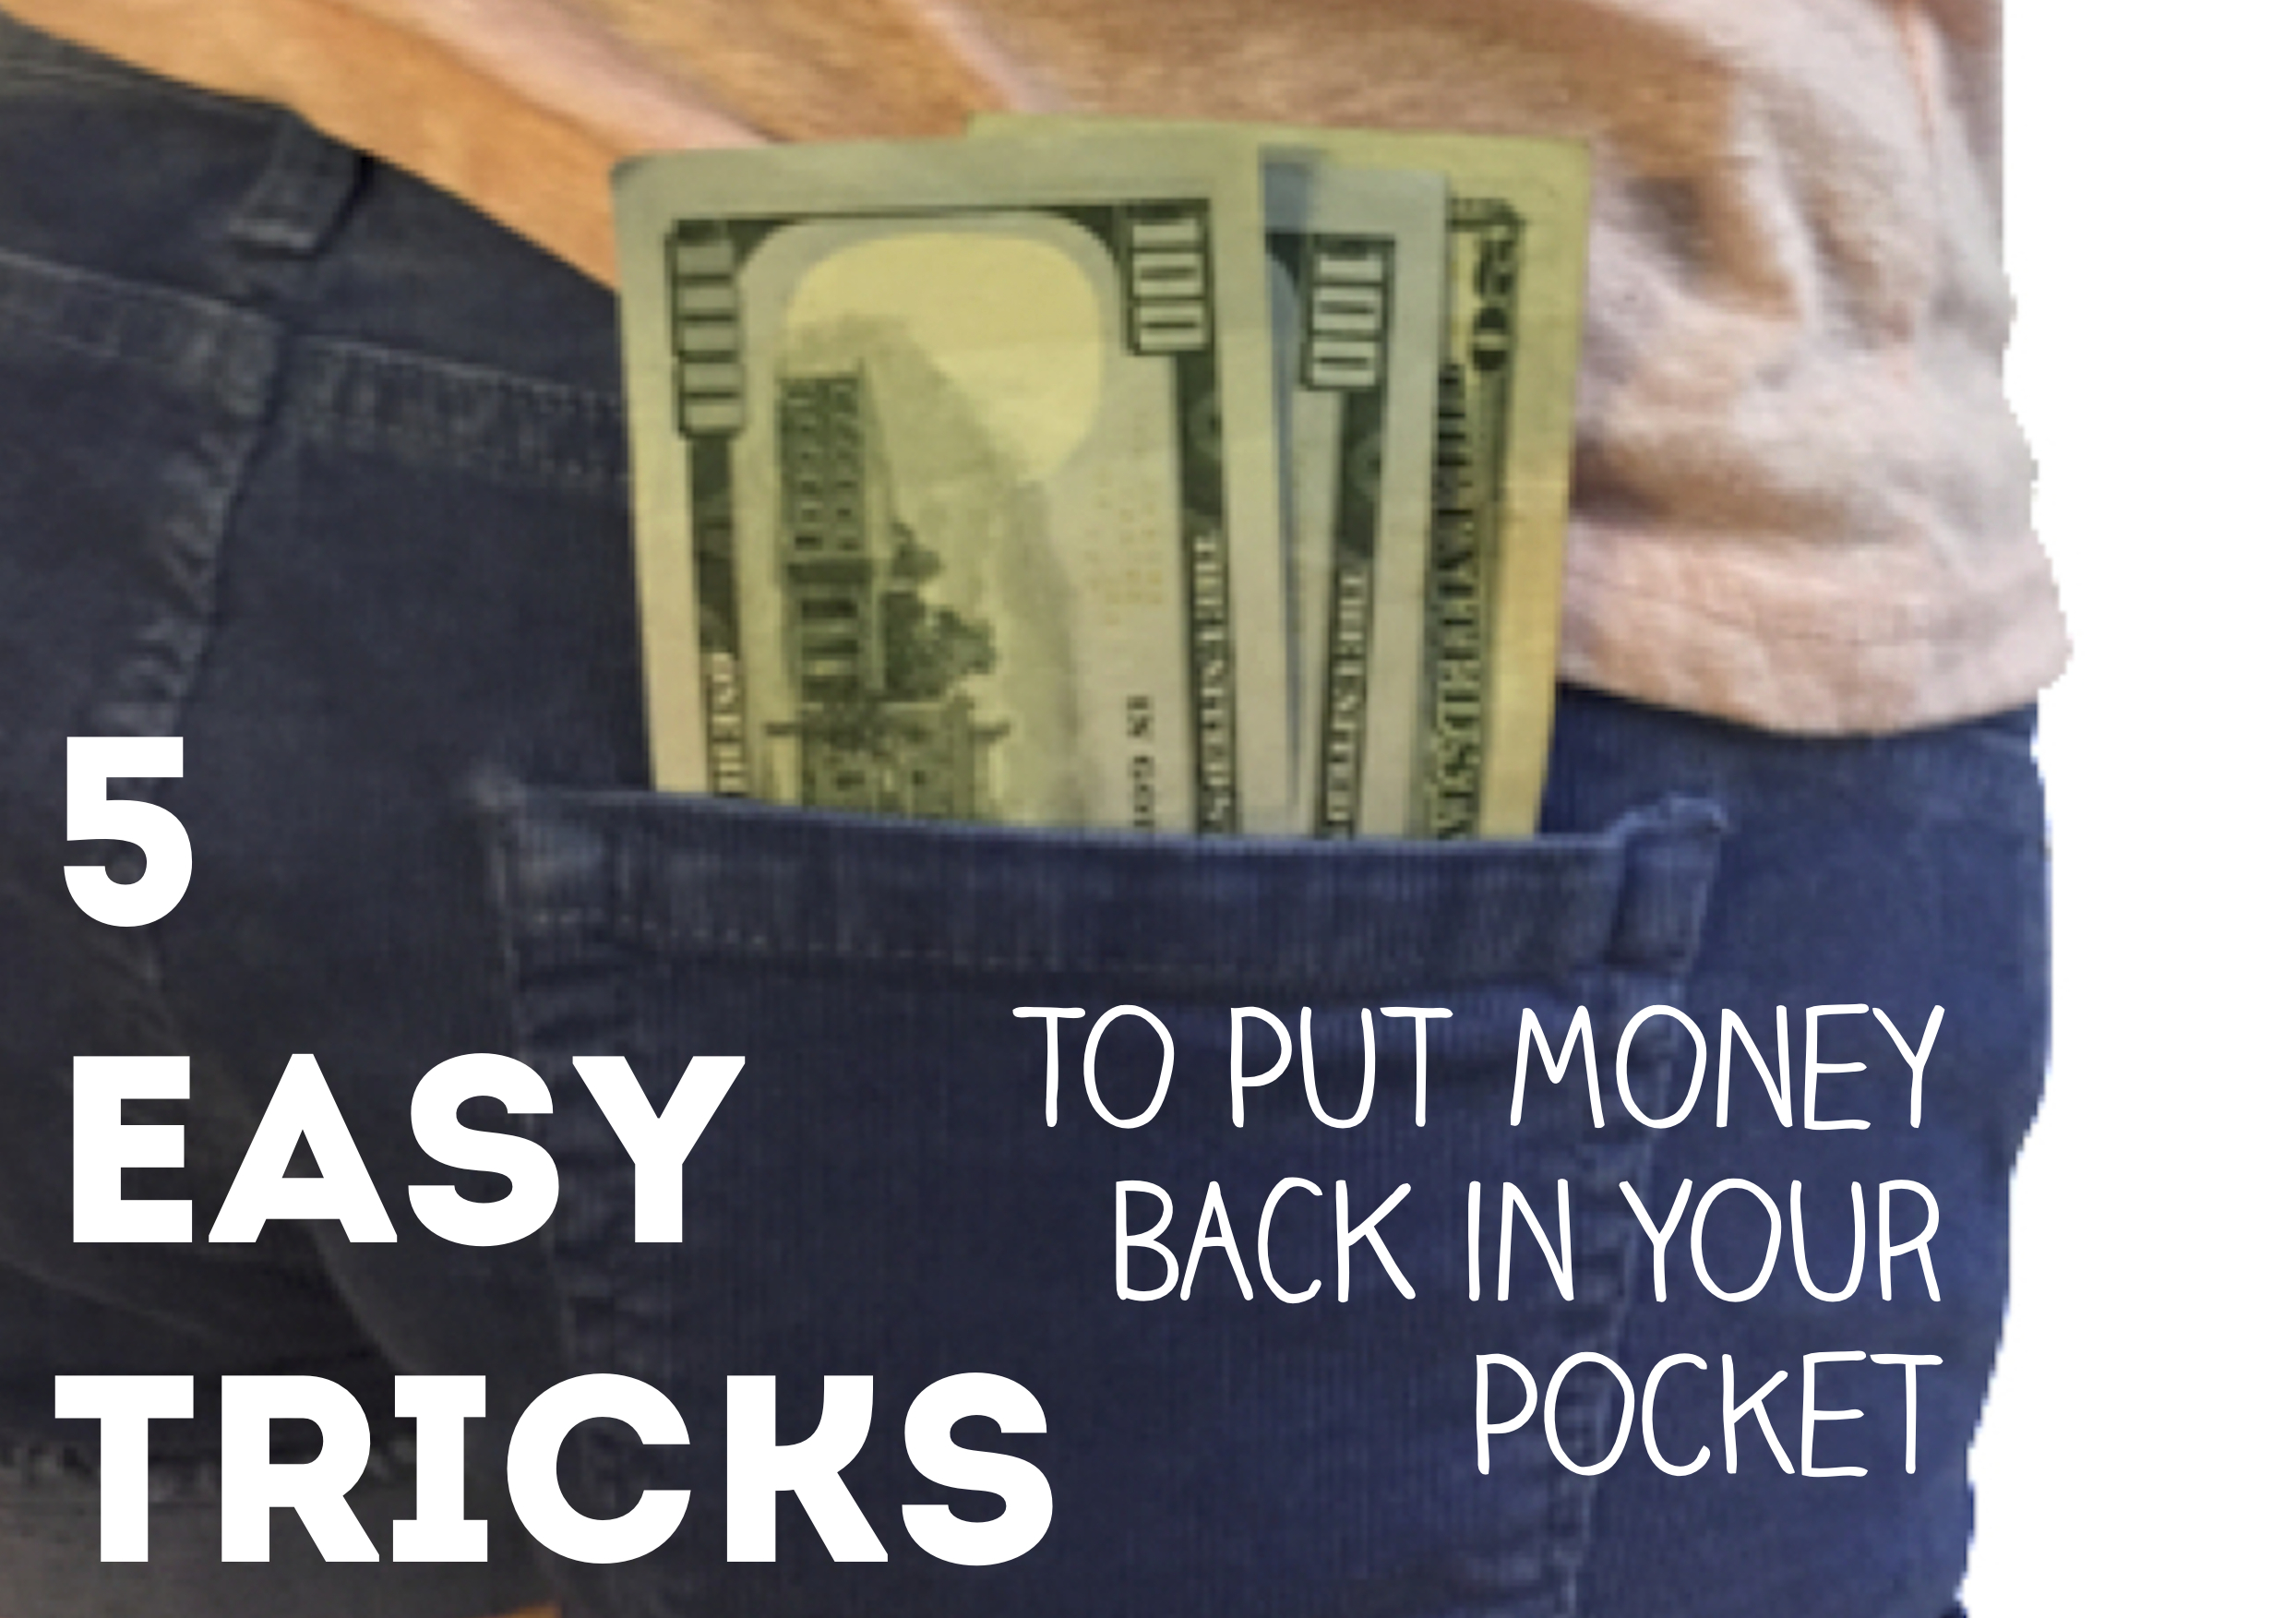 Five easy tricks to put money back in your pocket